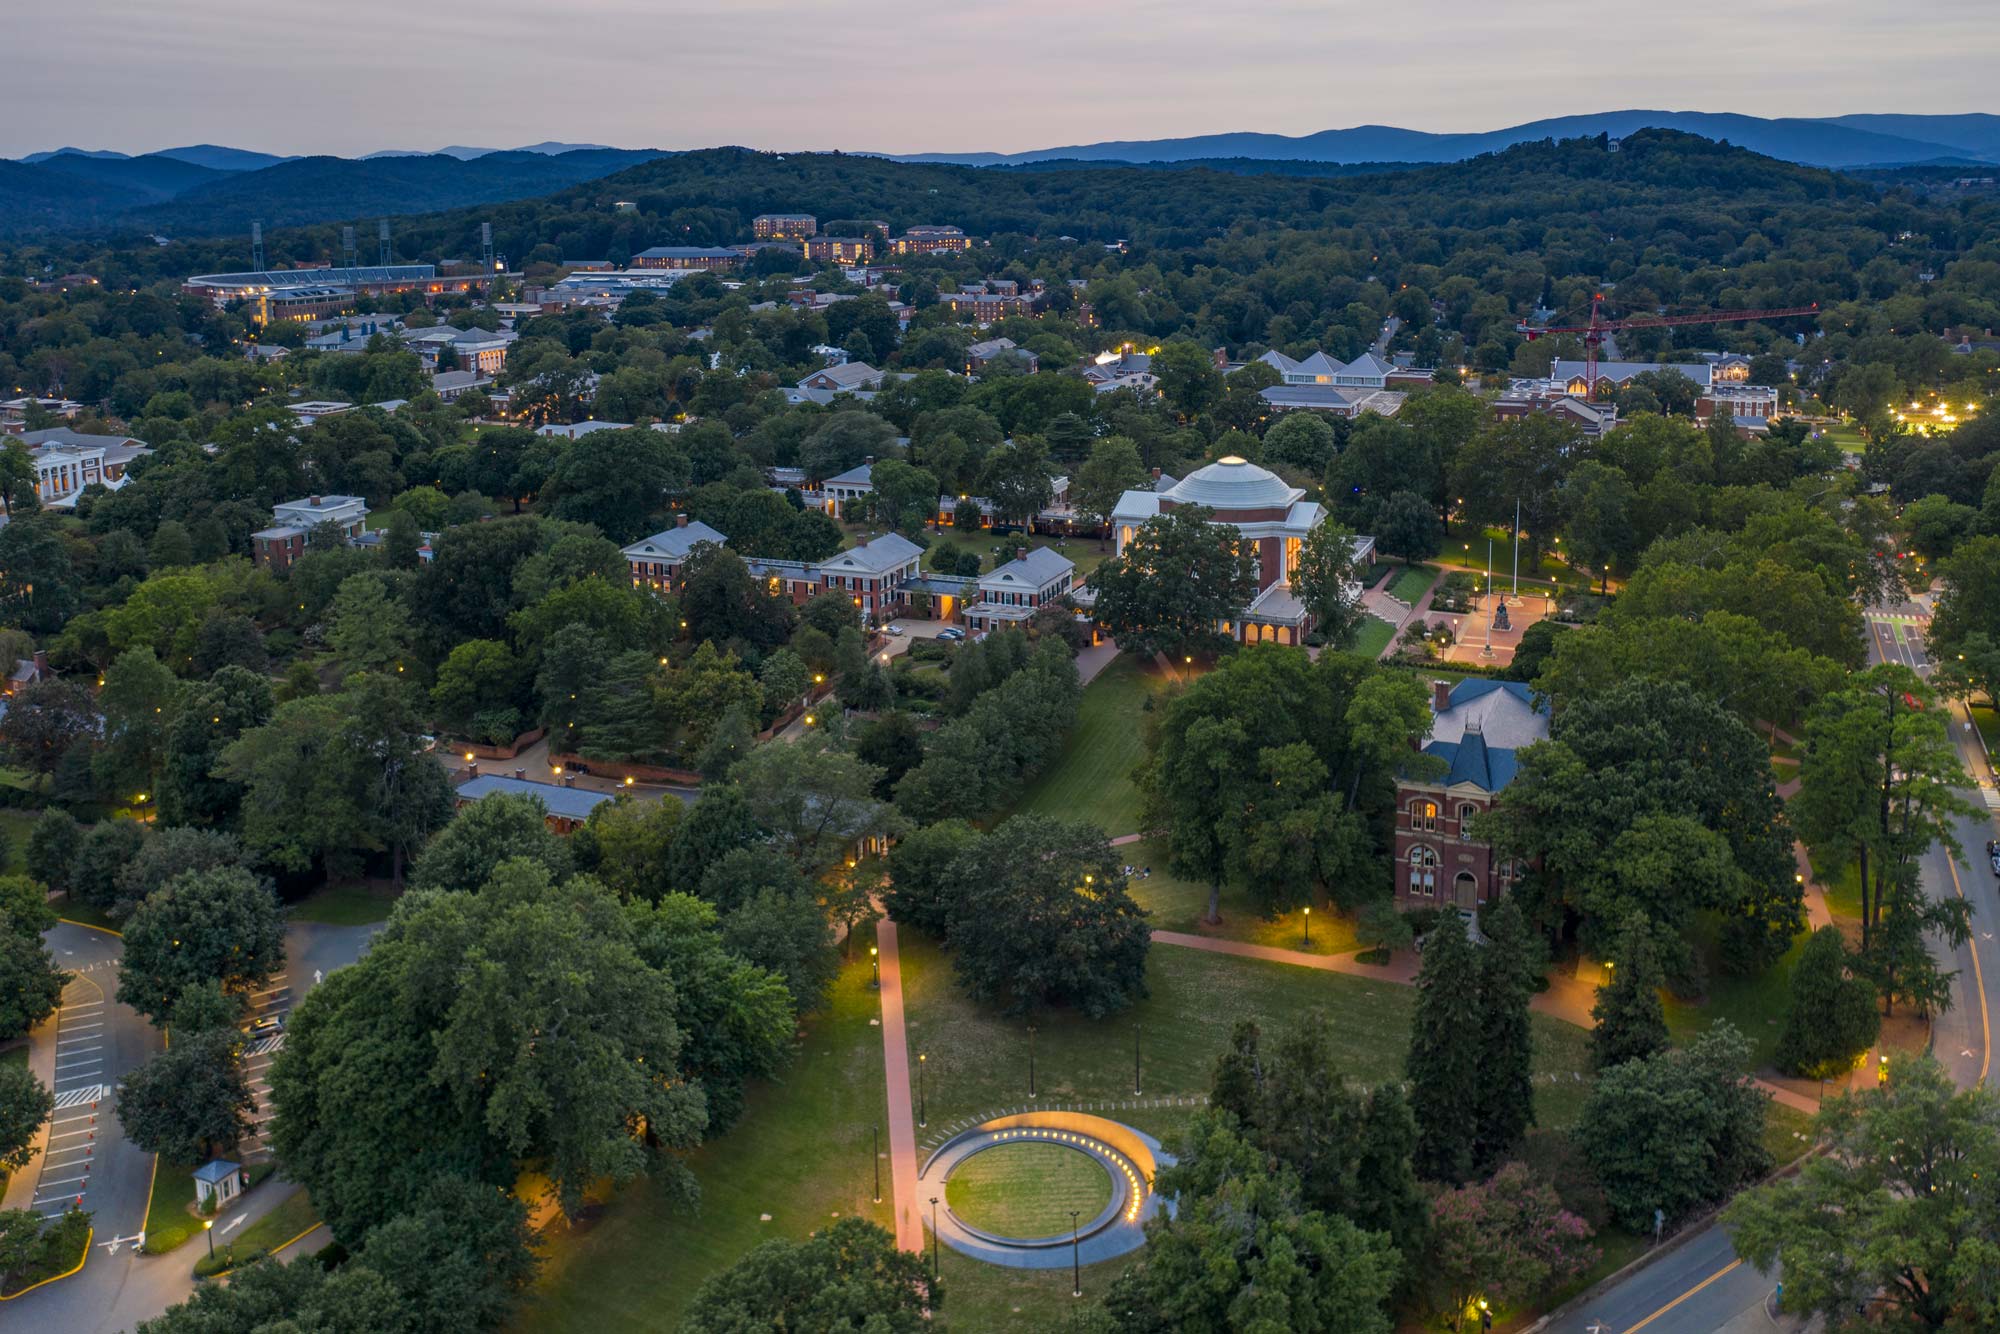 UVA Grounds as seen from above. The Memorial to Enslaved Laborers is in the foreground.